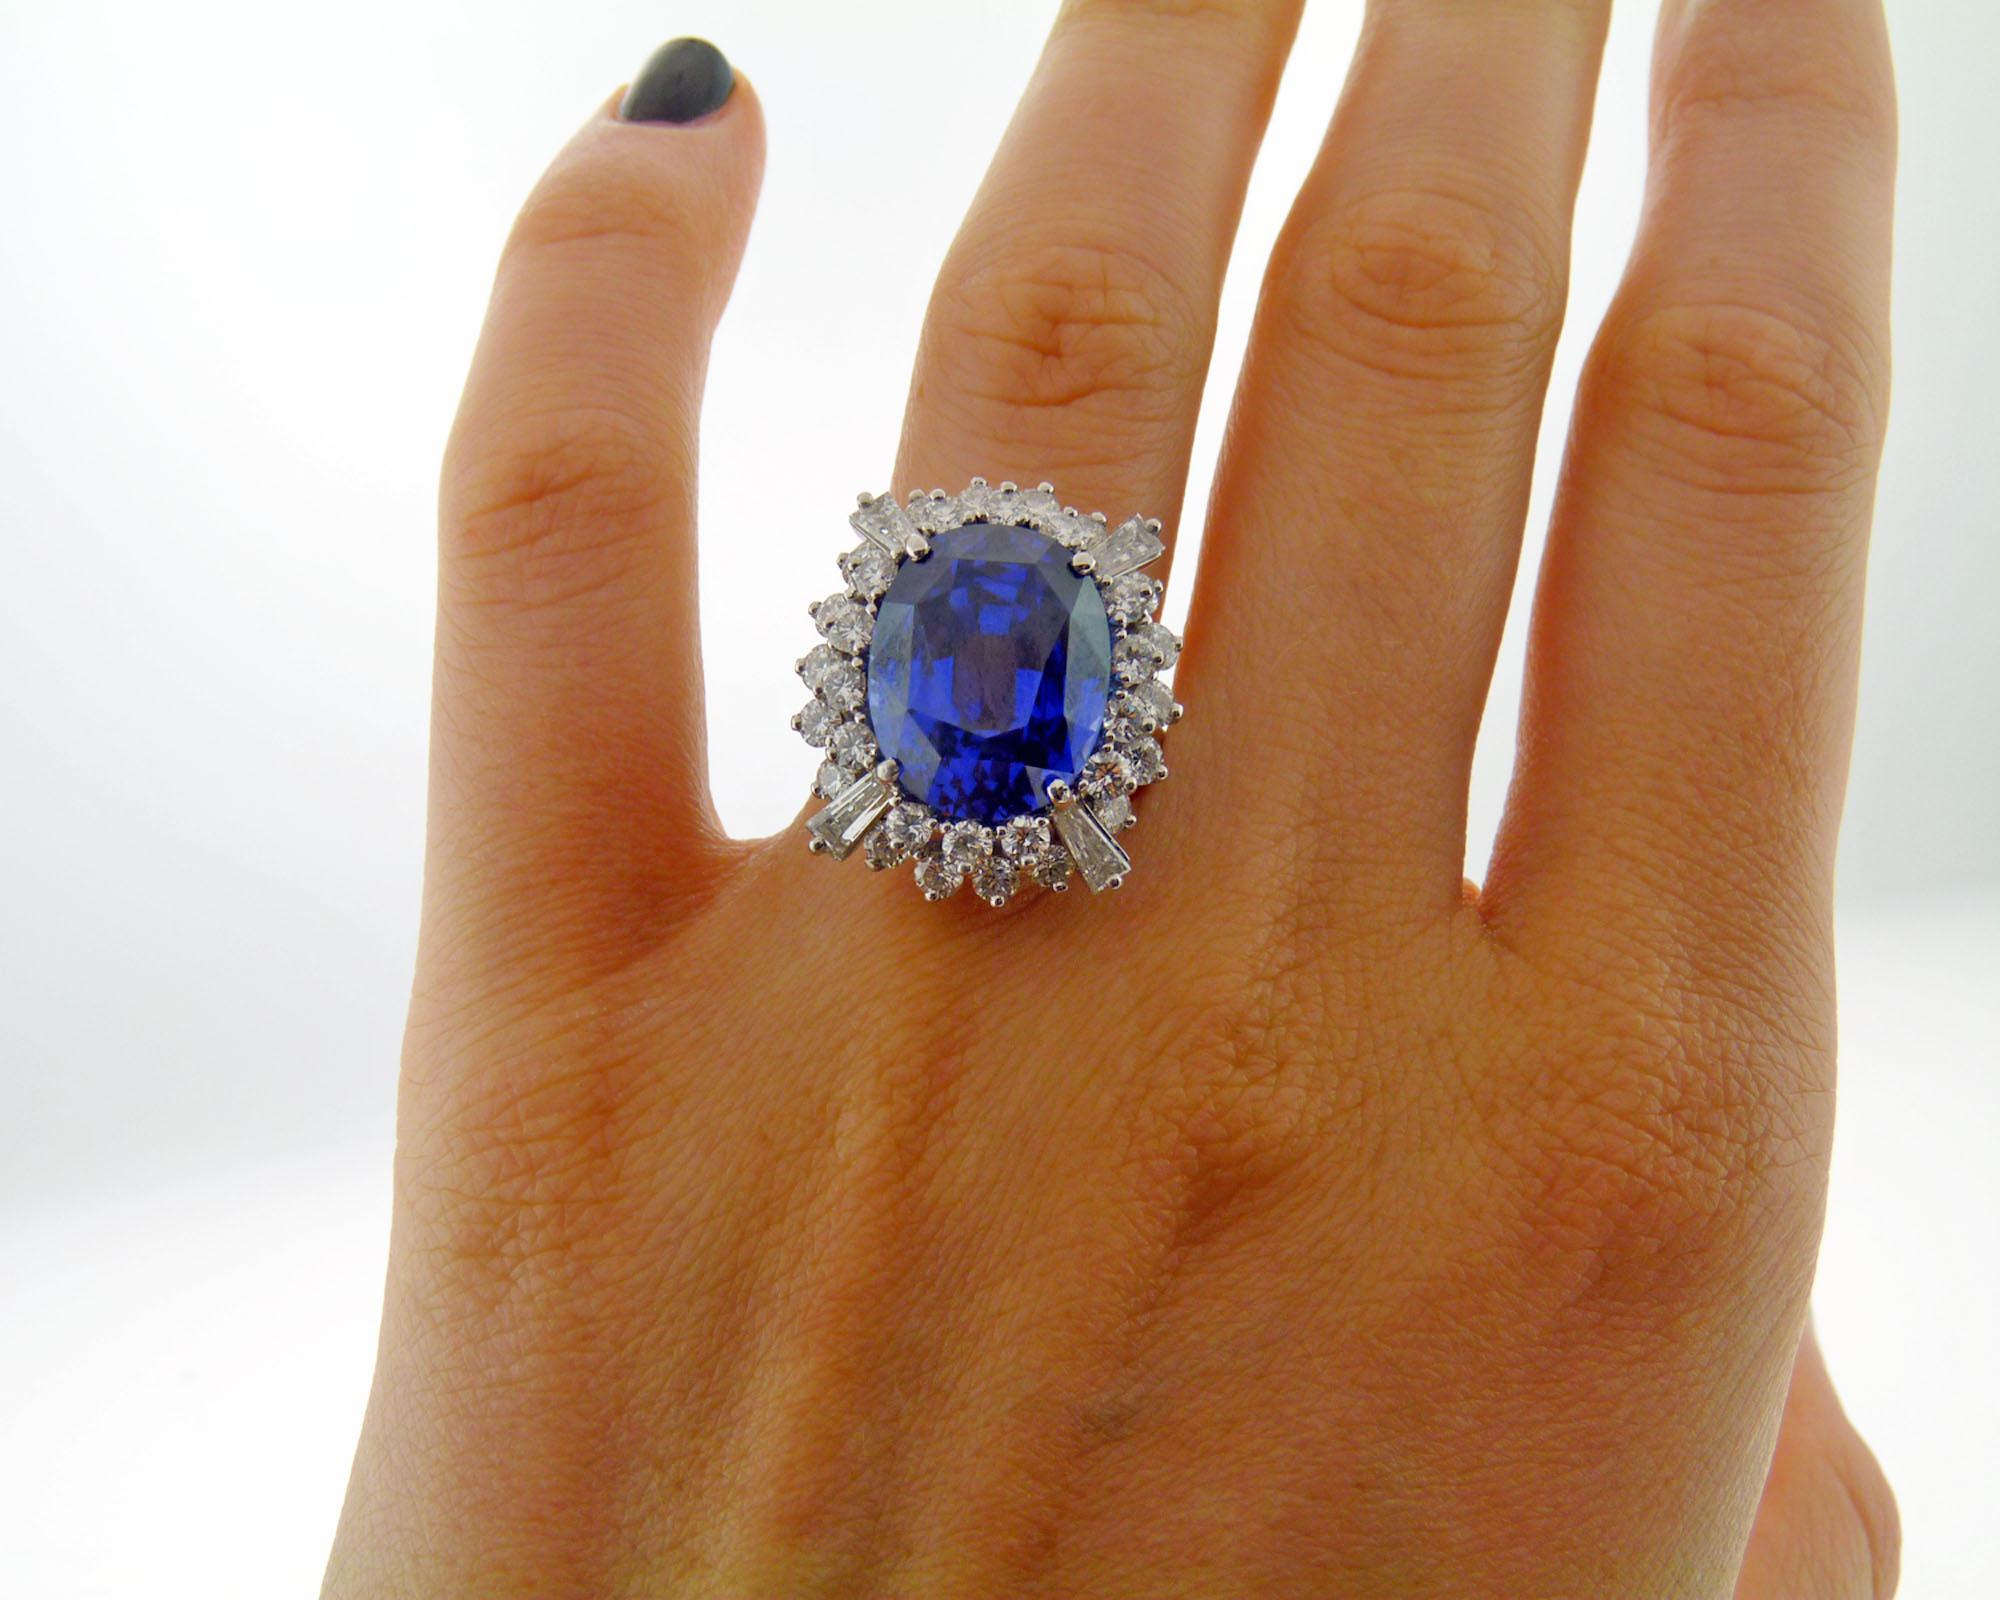 Spectra Fine Jewelry Certified 19.28 Carat Ceylon Sapphire Diamond Ring In New Condition For Sale In New York, NY